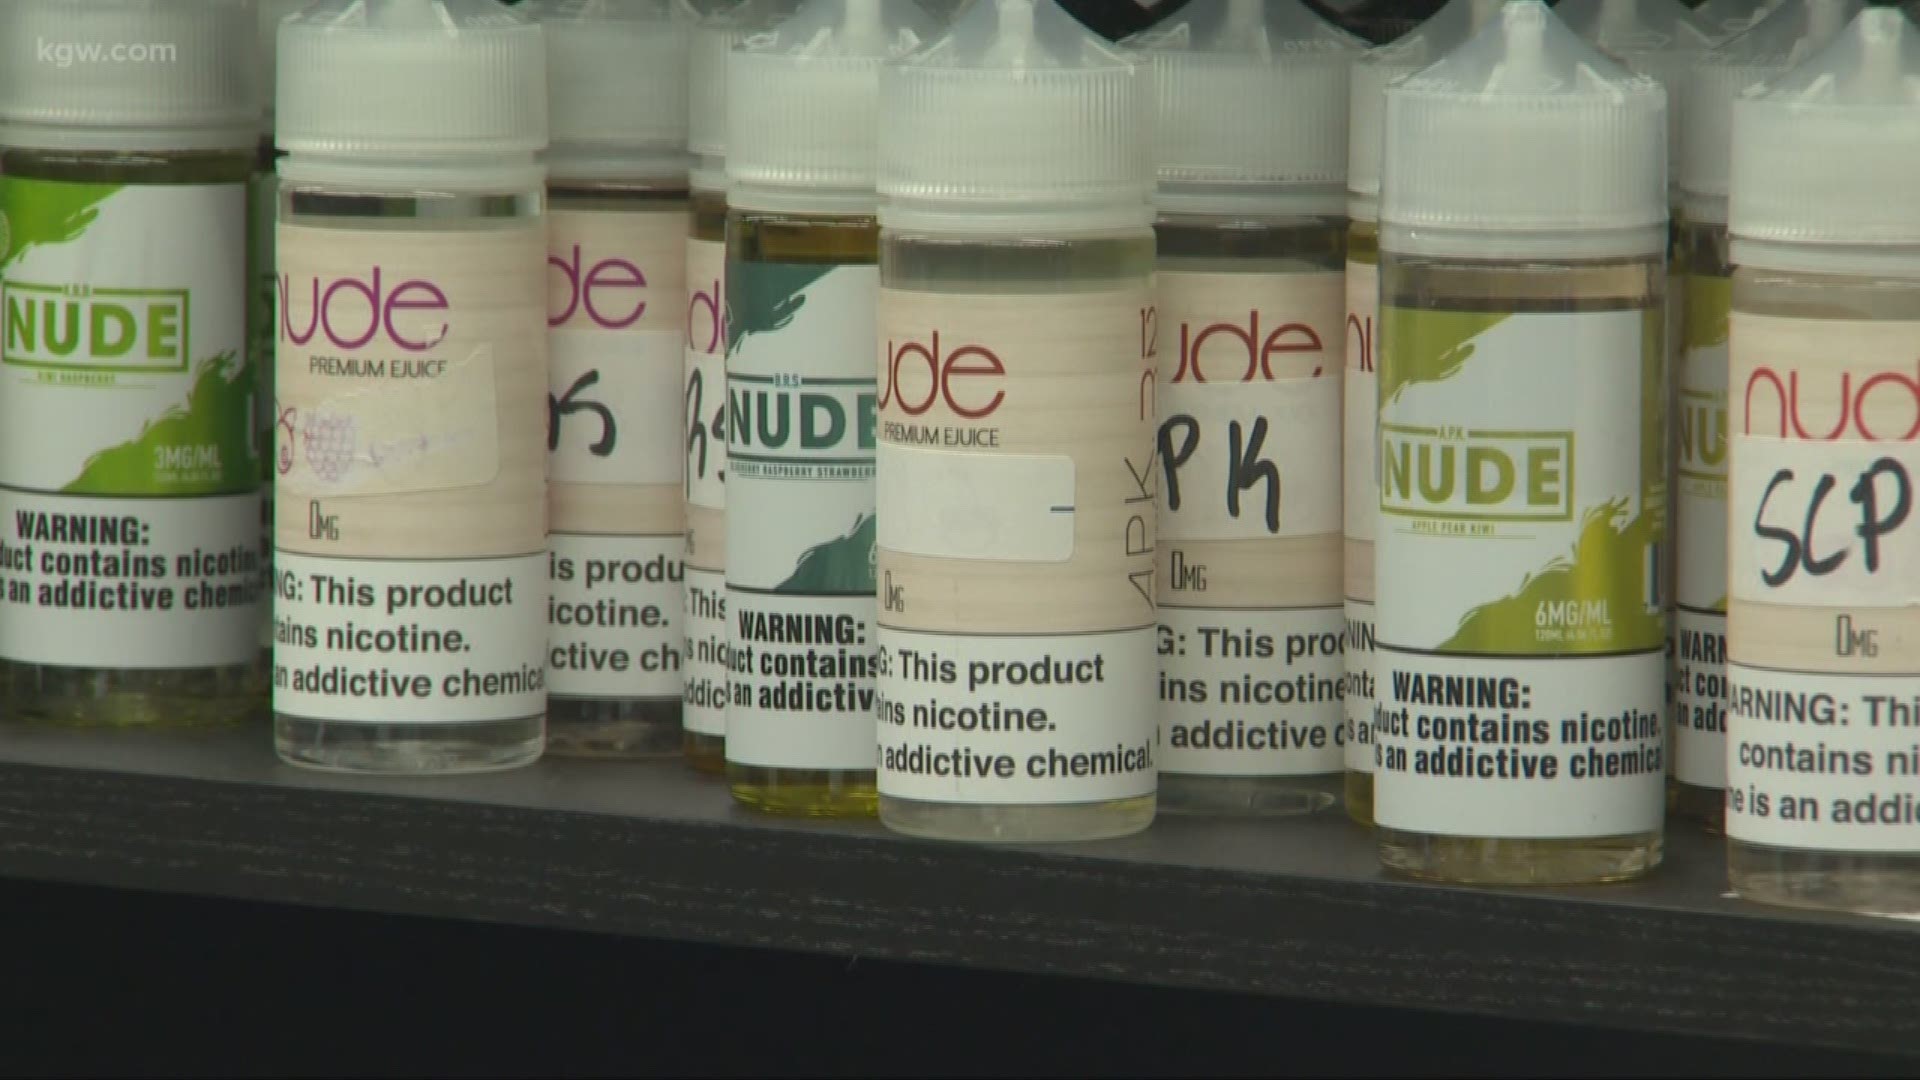 Oregon’s ban on flavored vaping products is now in effect. 11 people have been sickened with a vaping-related lung illness in Oregon, health officials said.